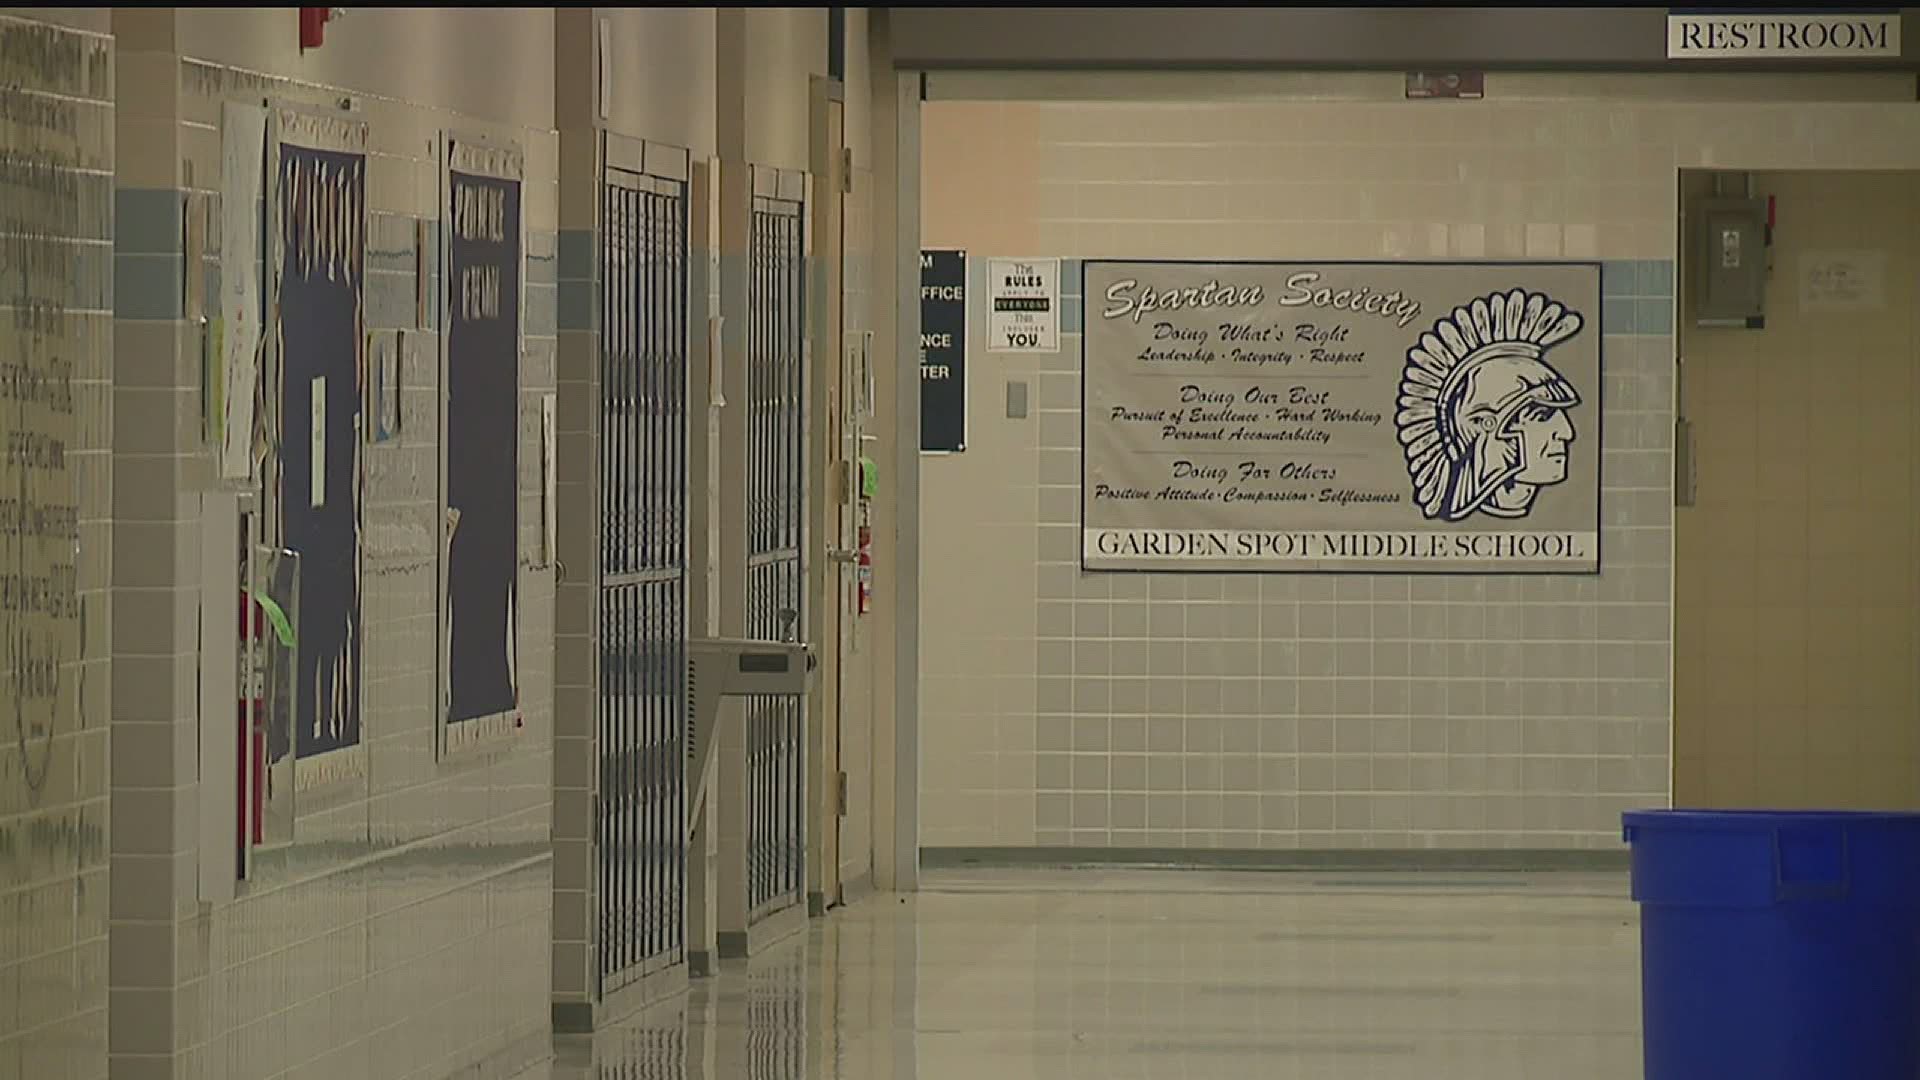 The Pennsylvania Department of Education continues to expect schools will reopen in the fall, with mitigation efforts in place.